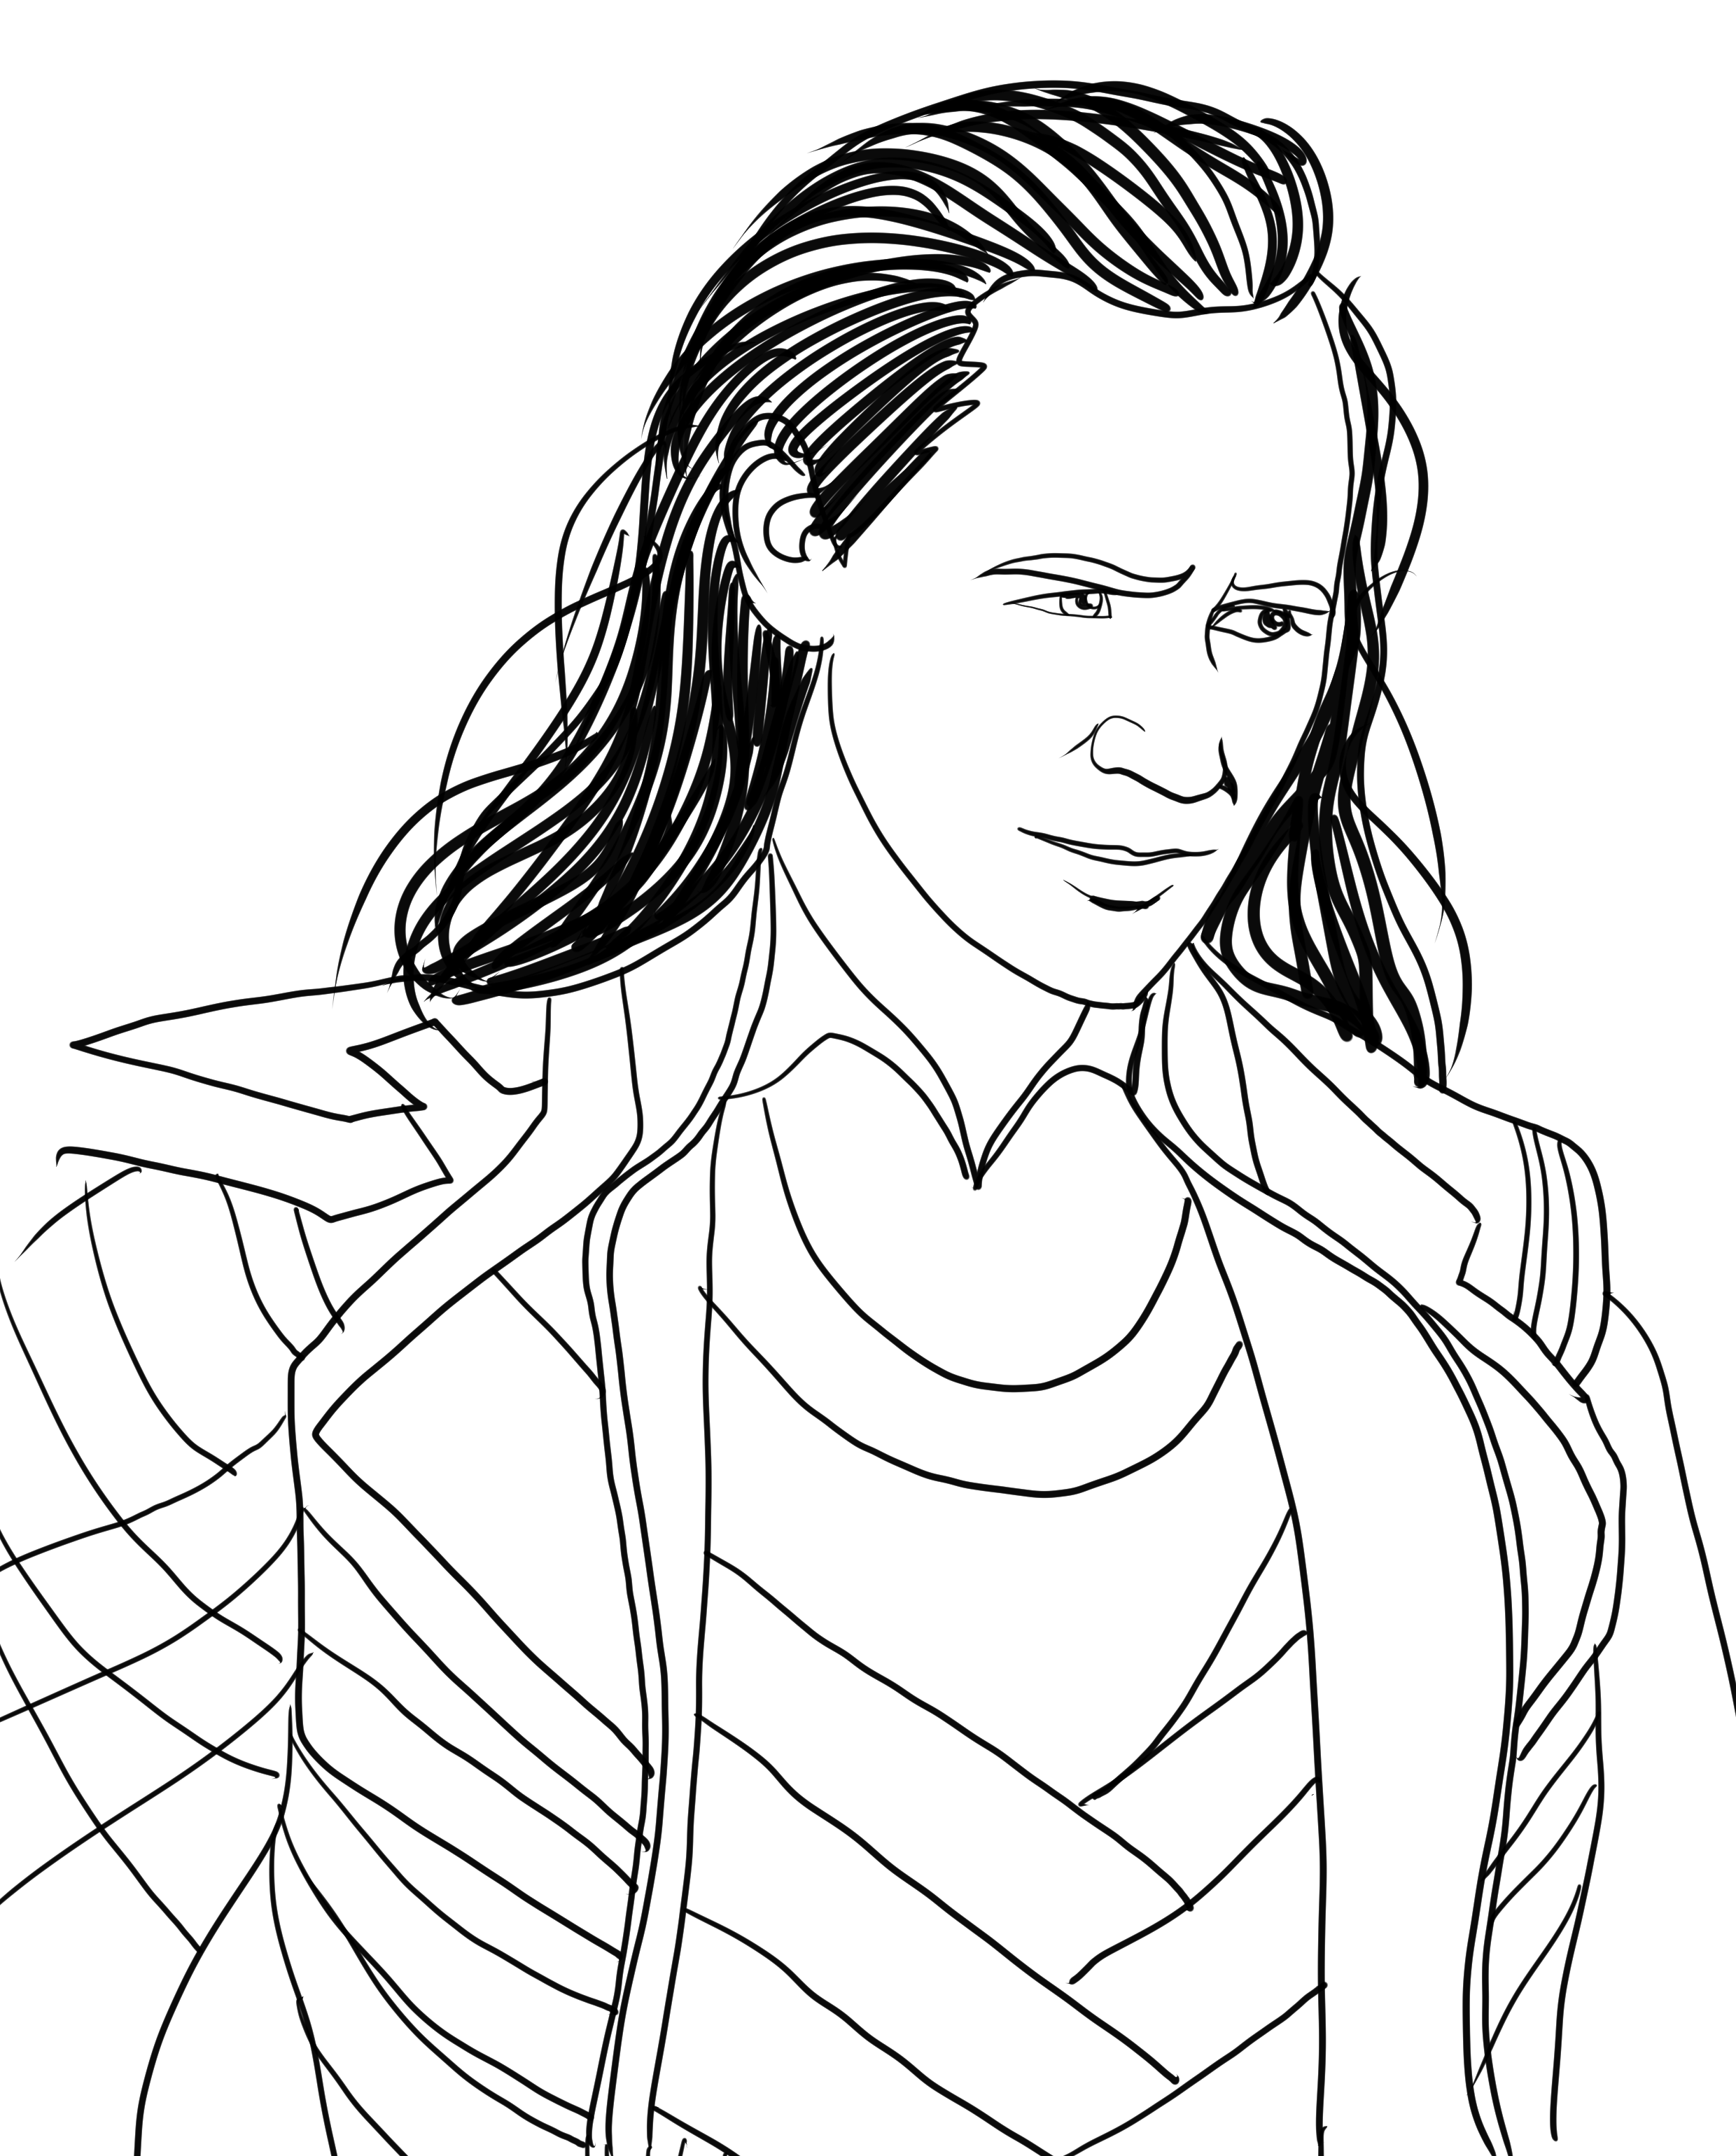 Loki 05 from Loki coloring page to print and coloring